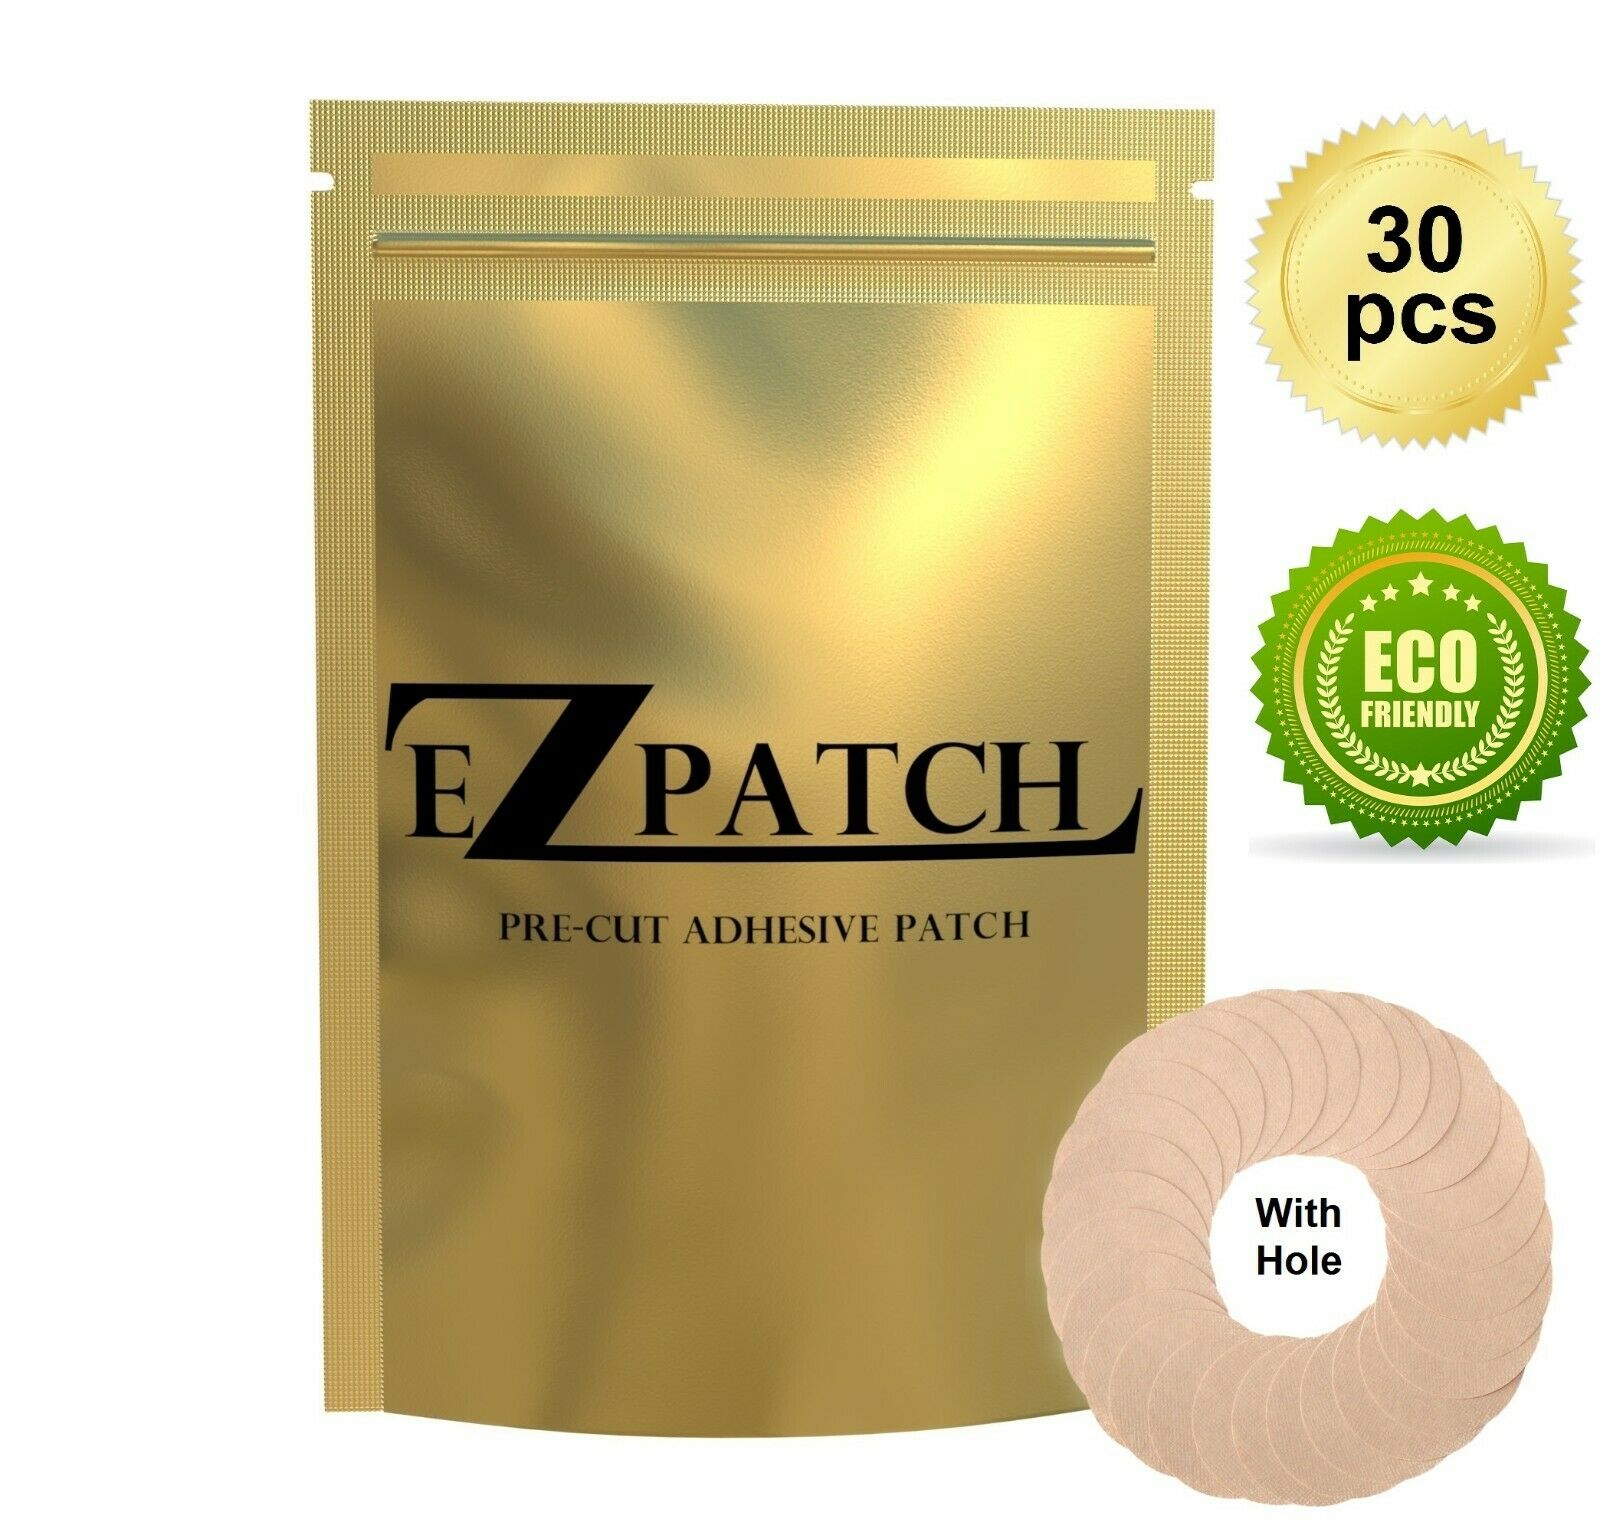 Ezpatch Adhesive Patch For Freestyle Libre With Hole - Pack Of 30